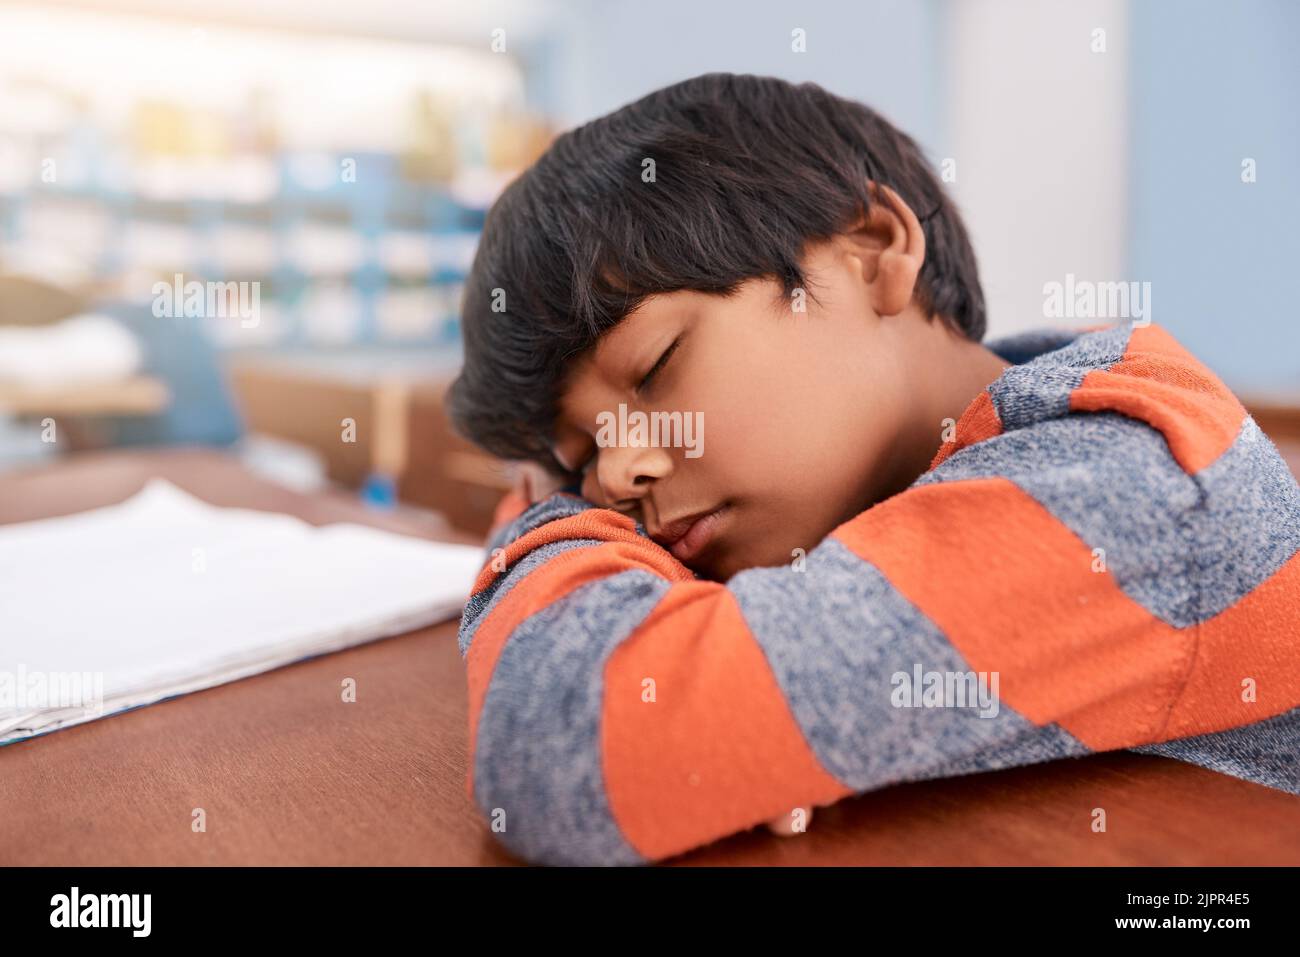 Just a quick nap. a tired elementary school child sleeping on his desk in the classroom. Stock Photo